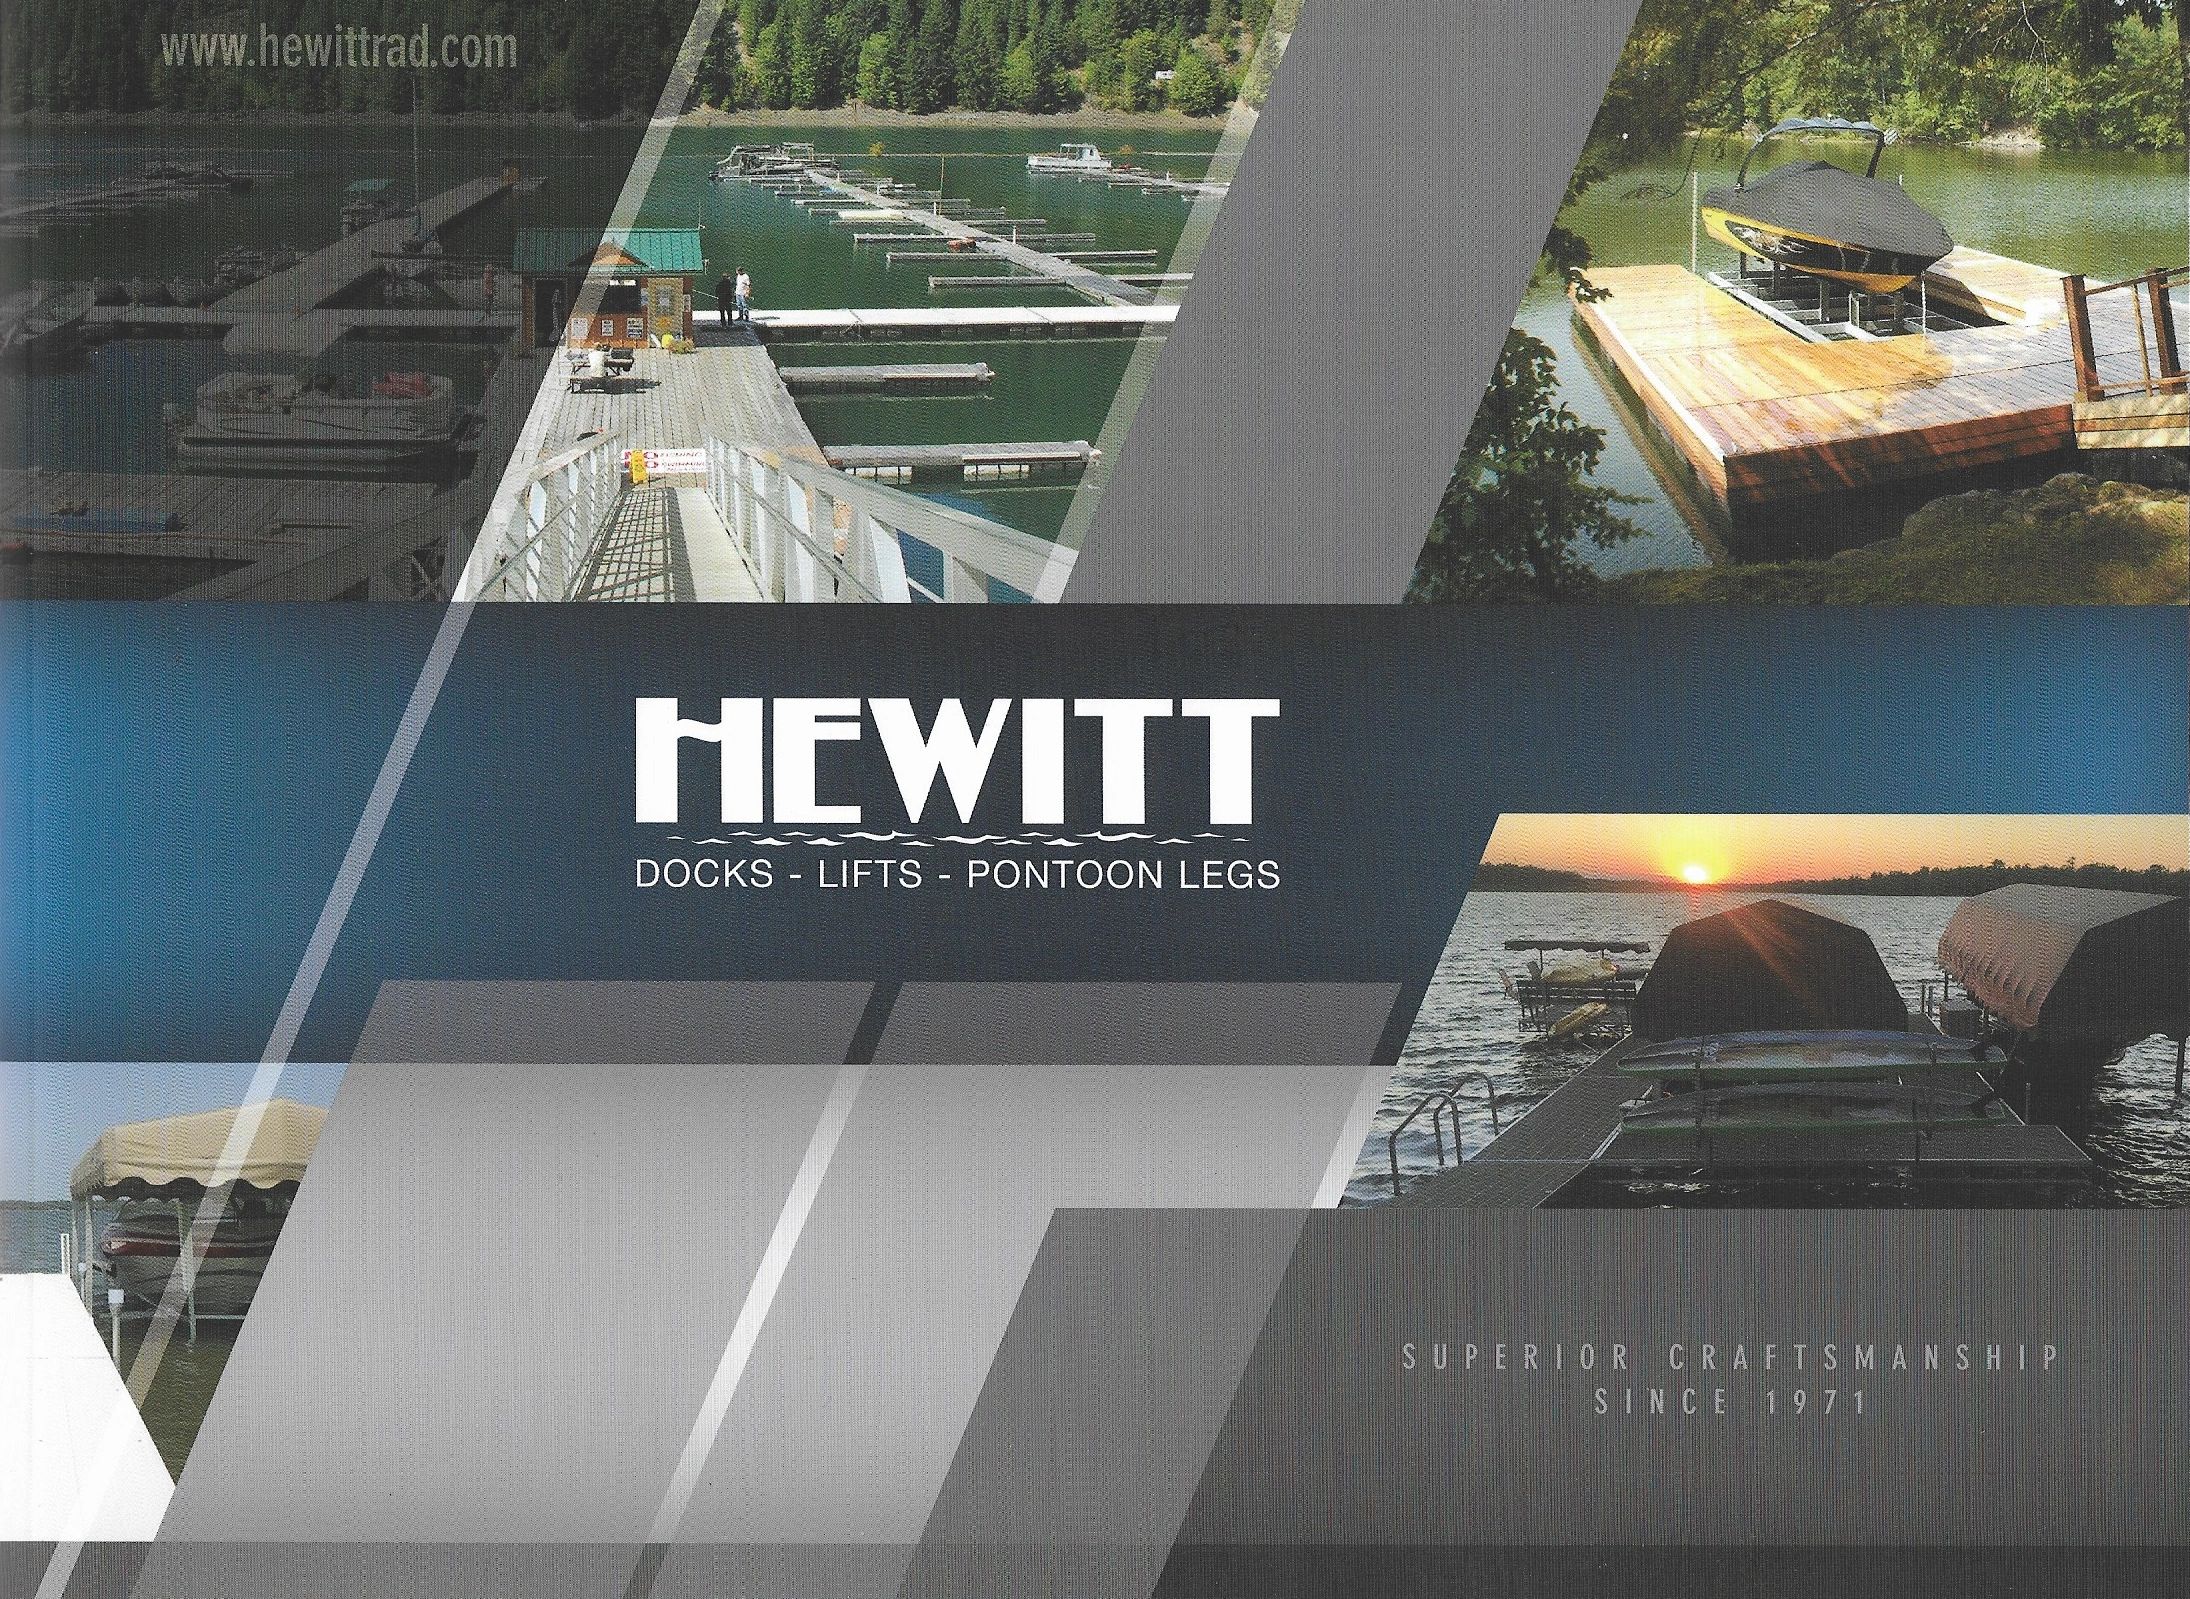 Lakeside Docks NY -  call or visit today to speak to an authorized Hewitt Docks representative.